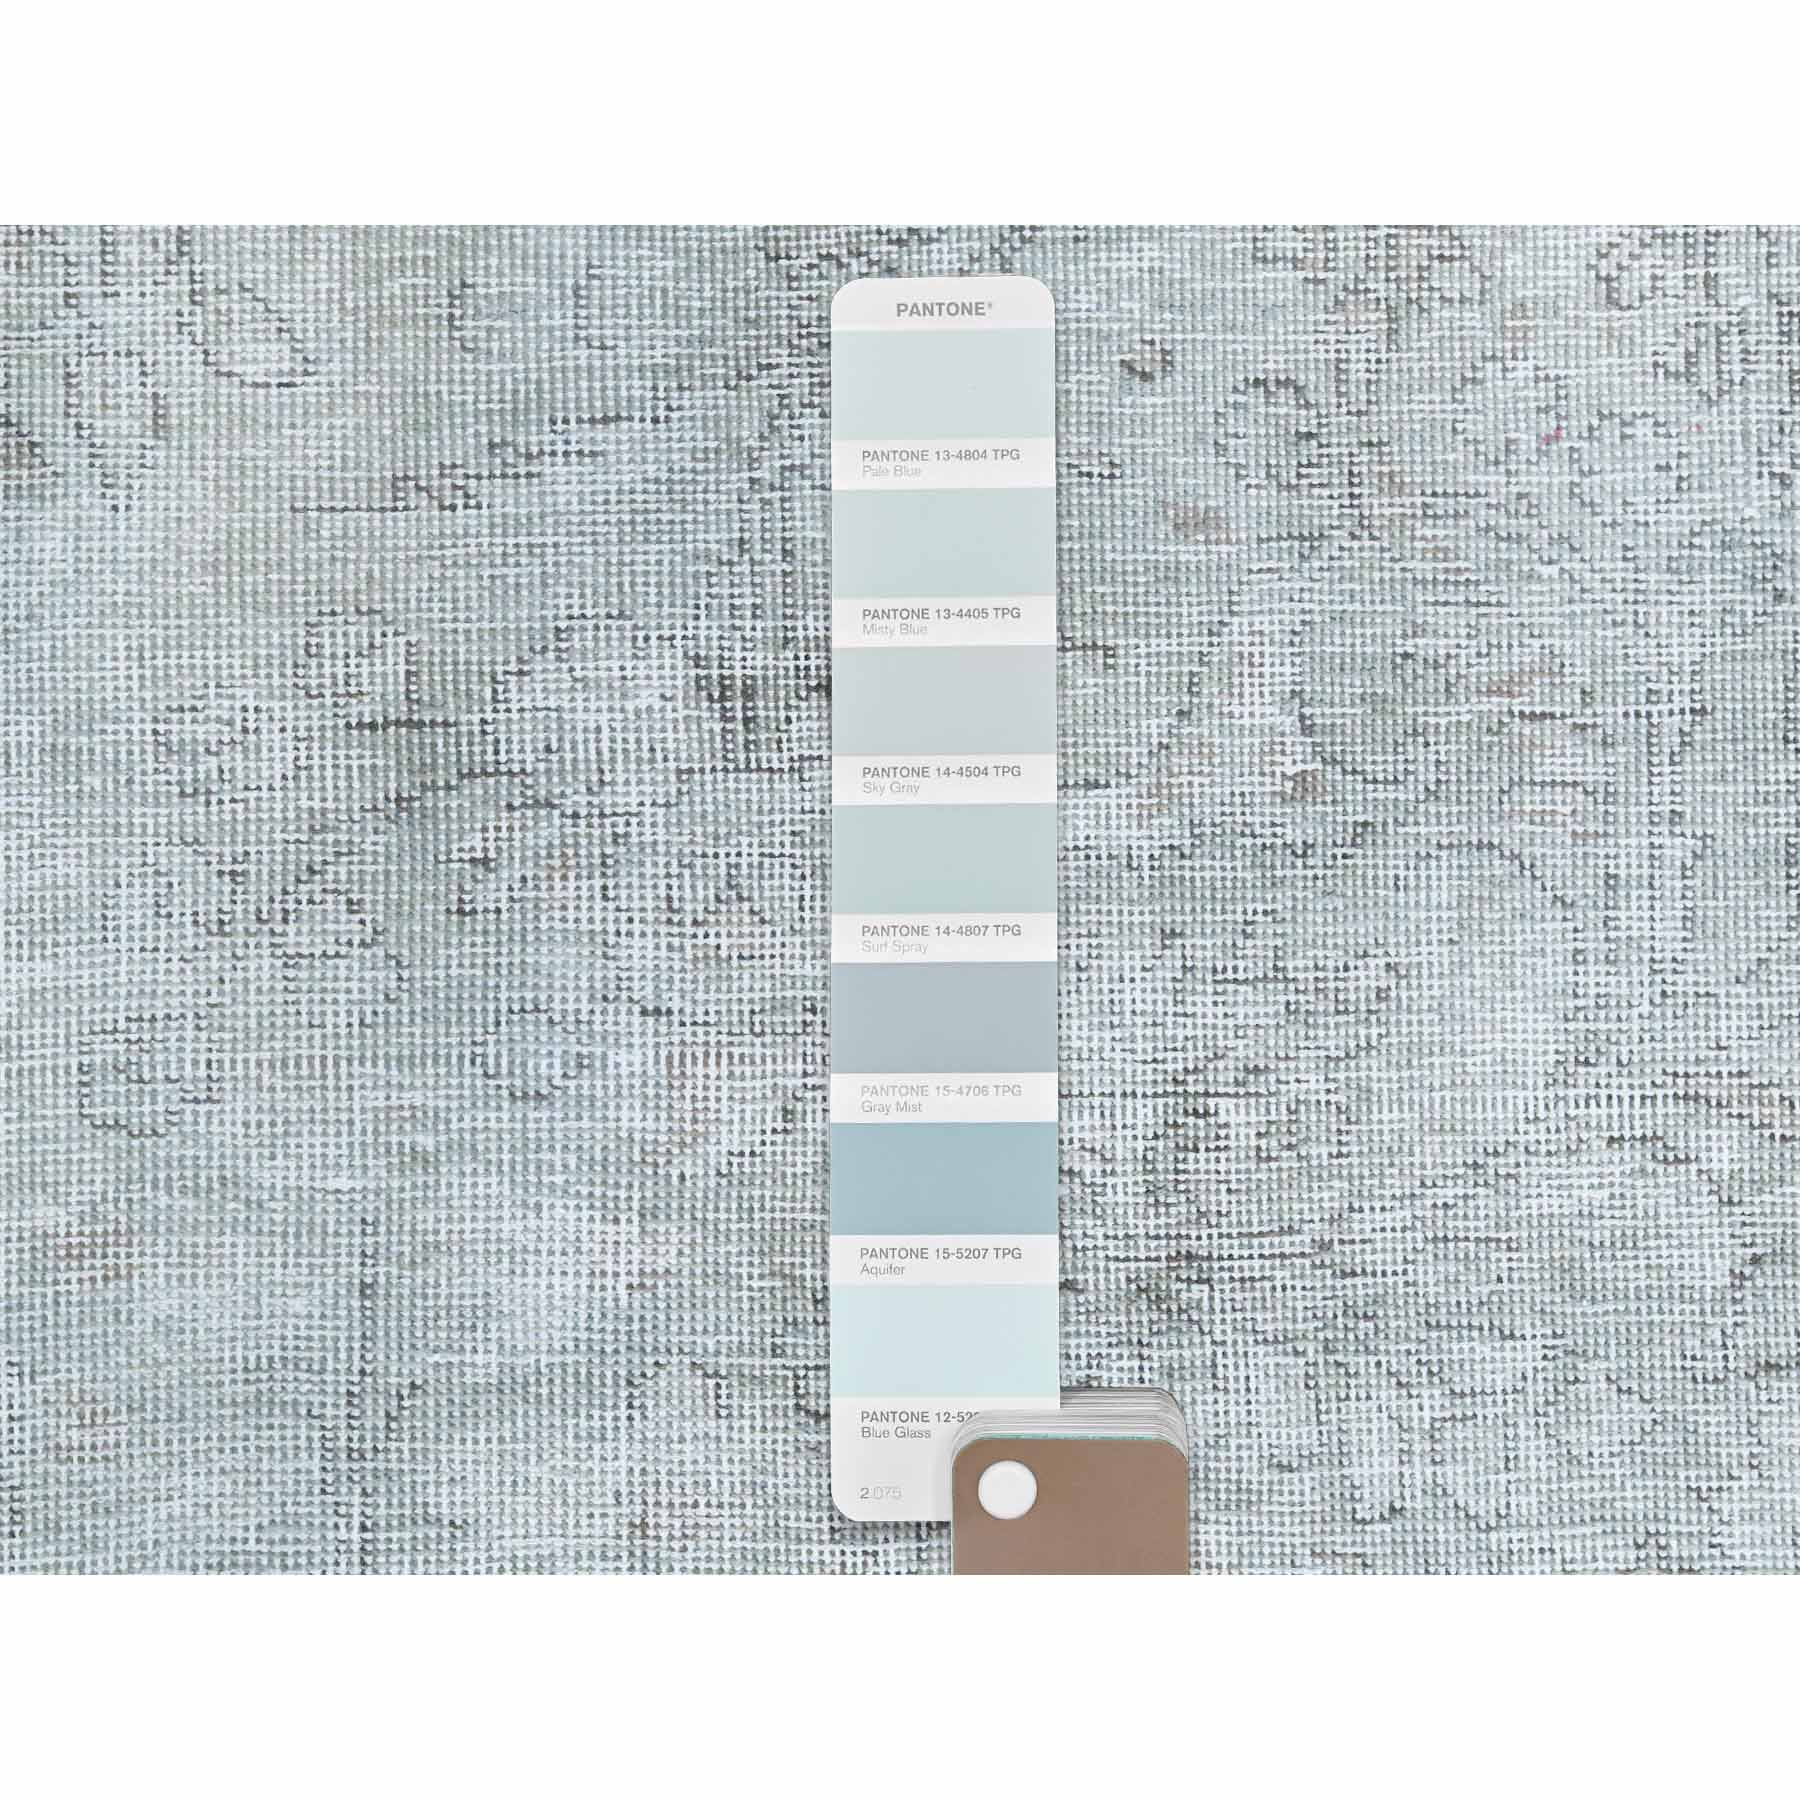 Overdyed-Vintage-Hand-Knotted-Rug-408565